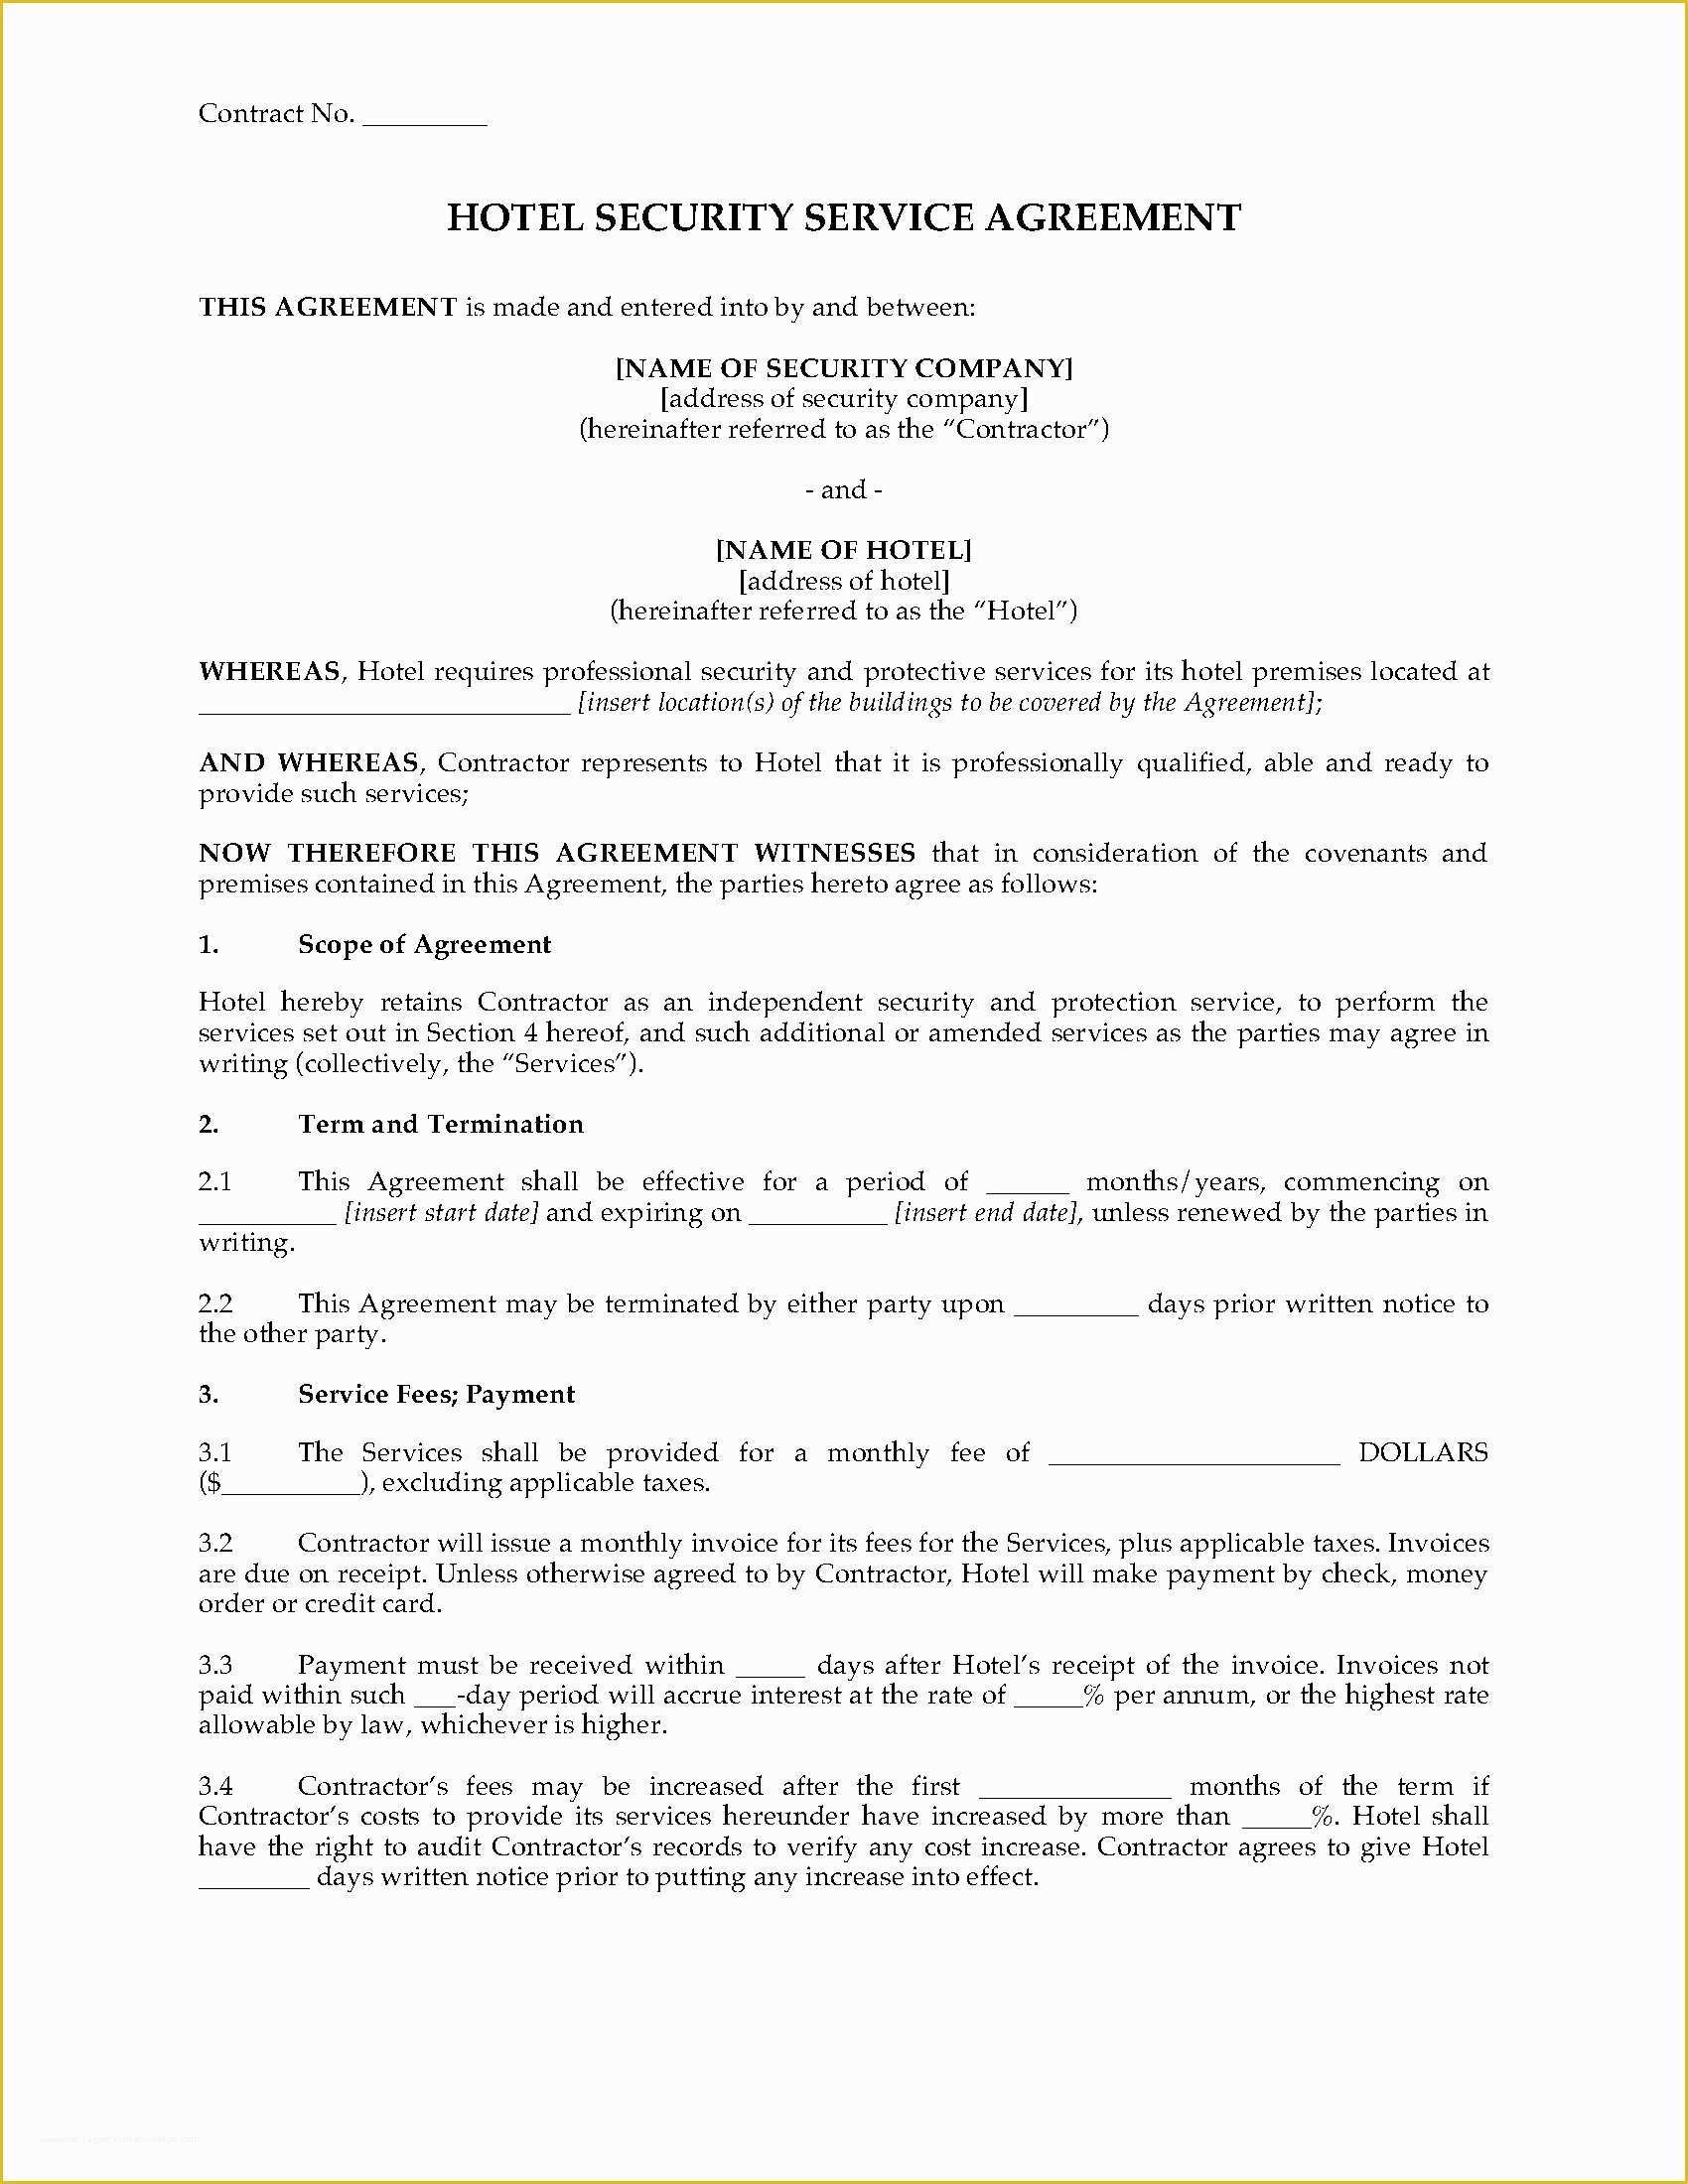 Security Service Contract Template Free Of Hotel Security Services Agreement